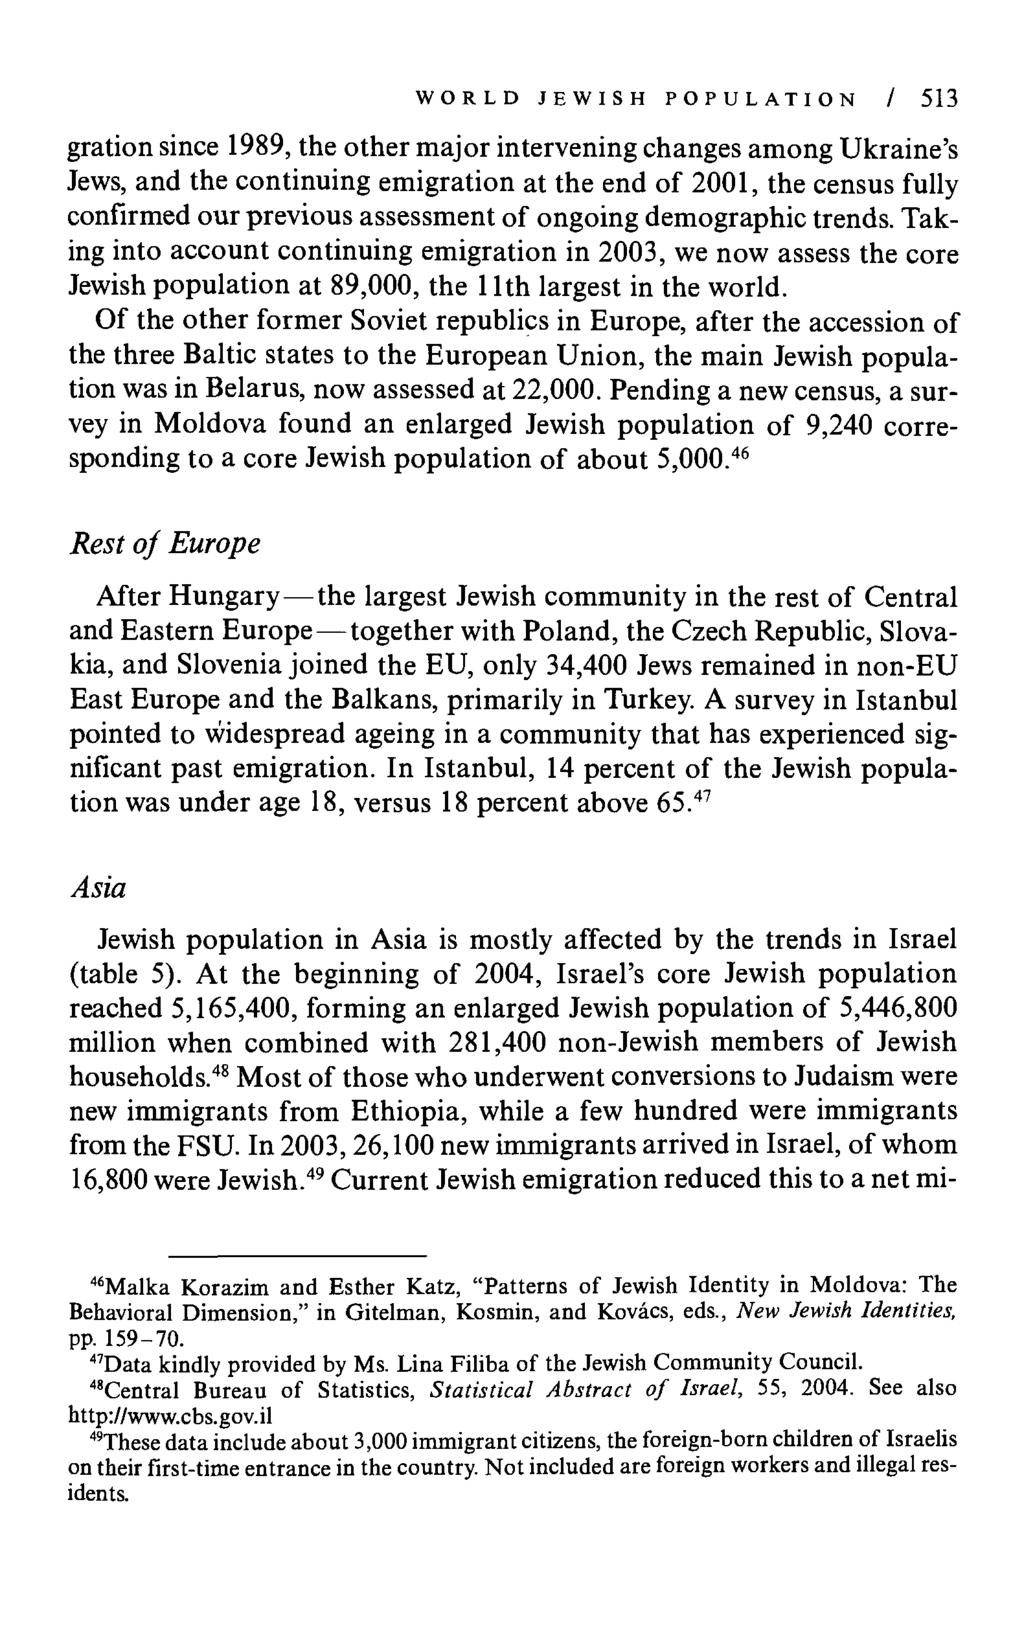 WORLD JEWISH POPULATION / 513 gration since 1989, the other major intervening changes among Ukraine's Jews, and the continuing emigration at the end of 2001, the census fully confirmed our previous